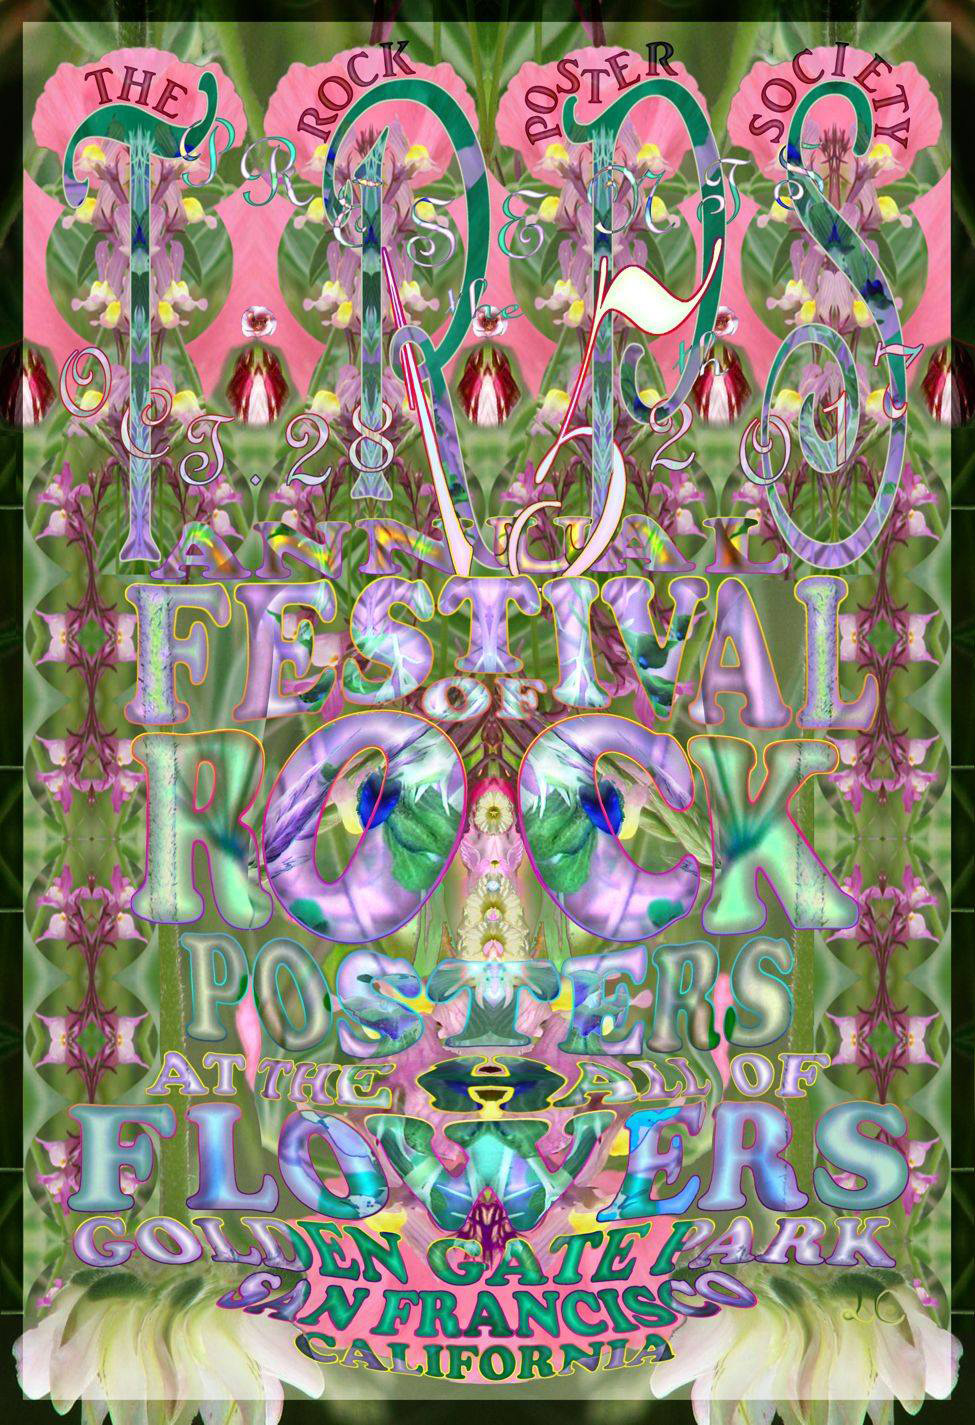 TRPS presents Festival of Rock Posters 2017 event poster by Lee Conklin on Saturday, October 28, 2017, San Francisco County Fair Building (aka Hall of Flowers) Golden Gate Park, San Francisco, CA